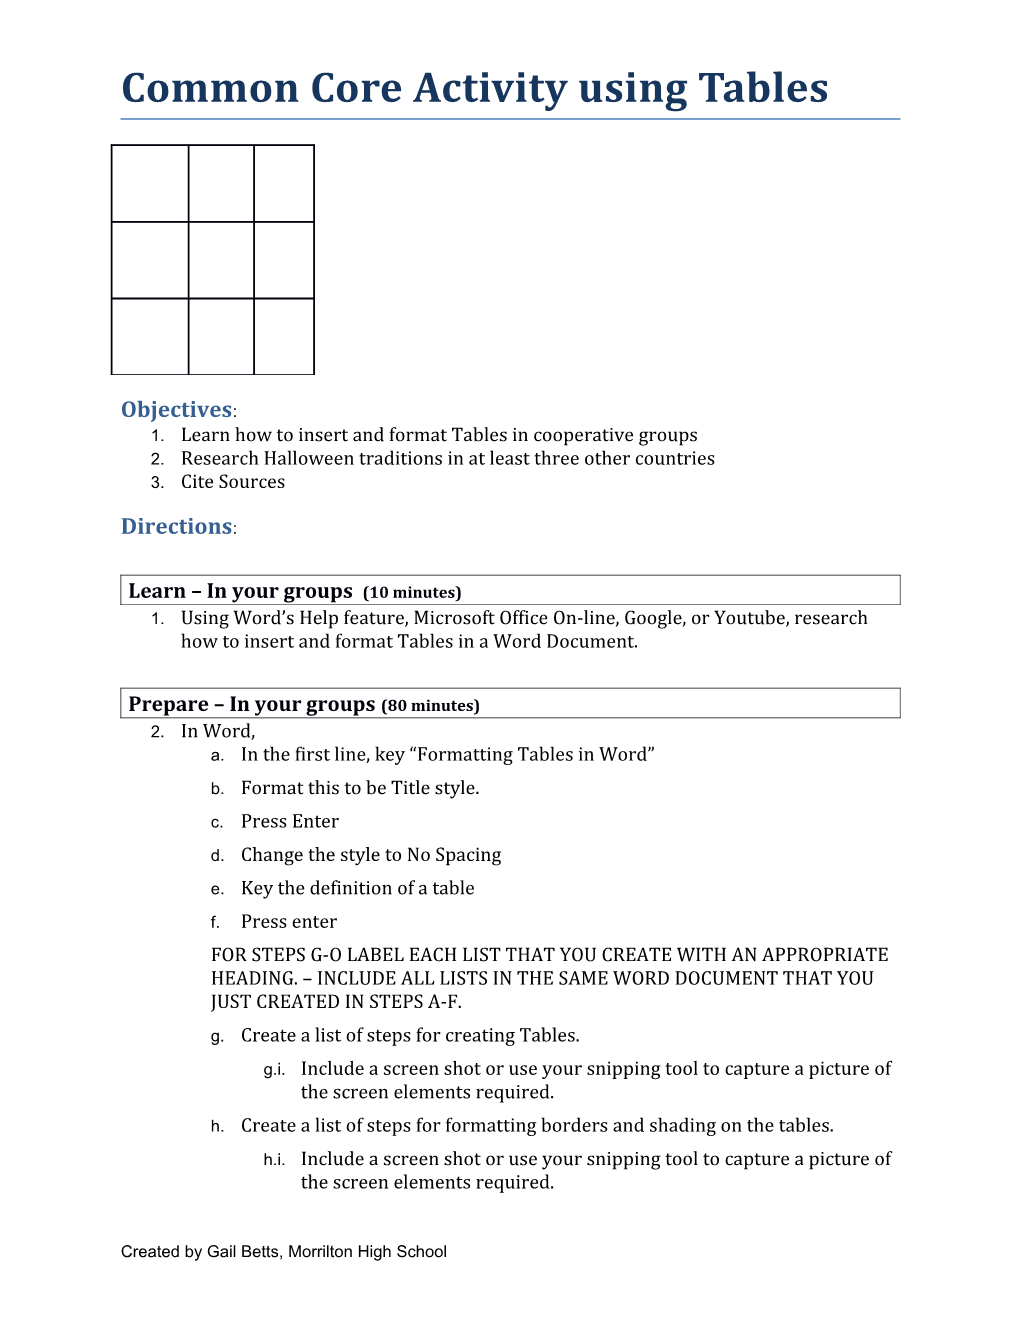 Common Core Activity Using Tables